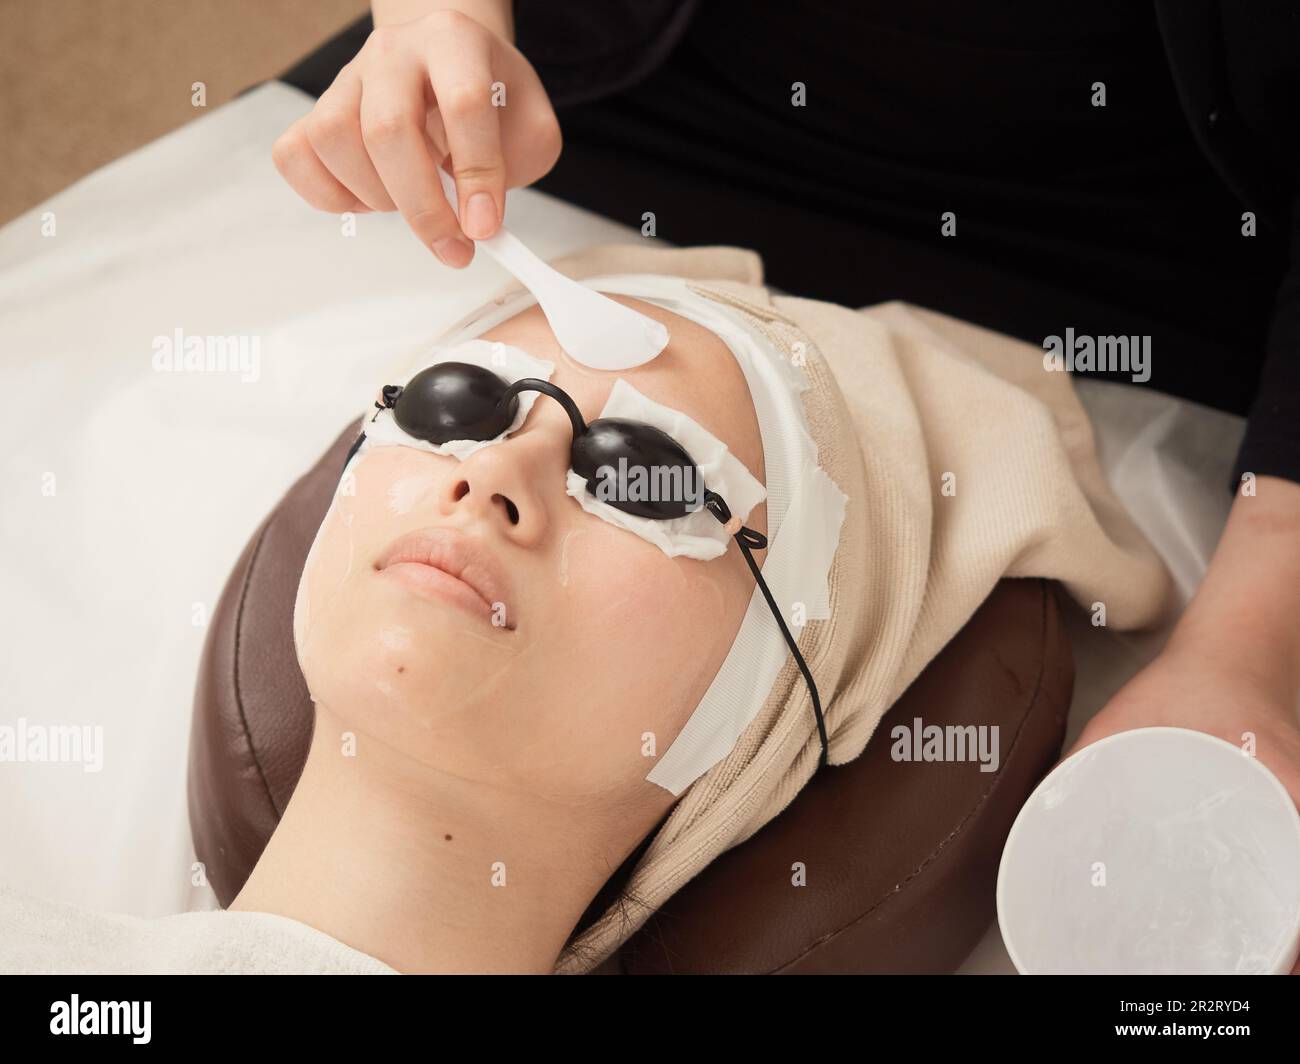 Gel image for light hair removal Stock Photo